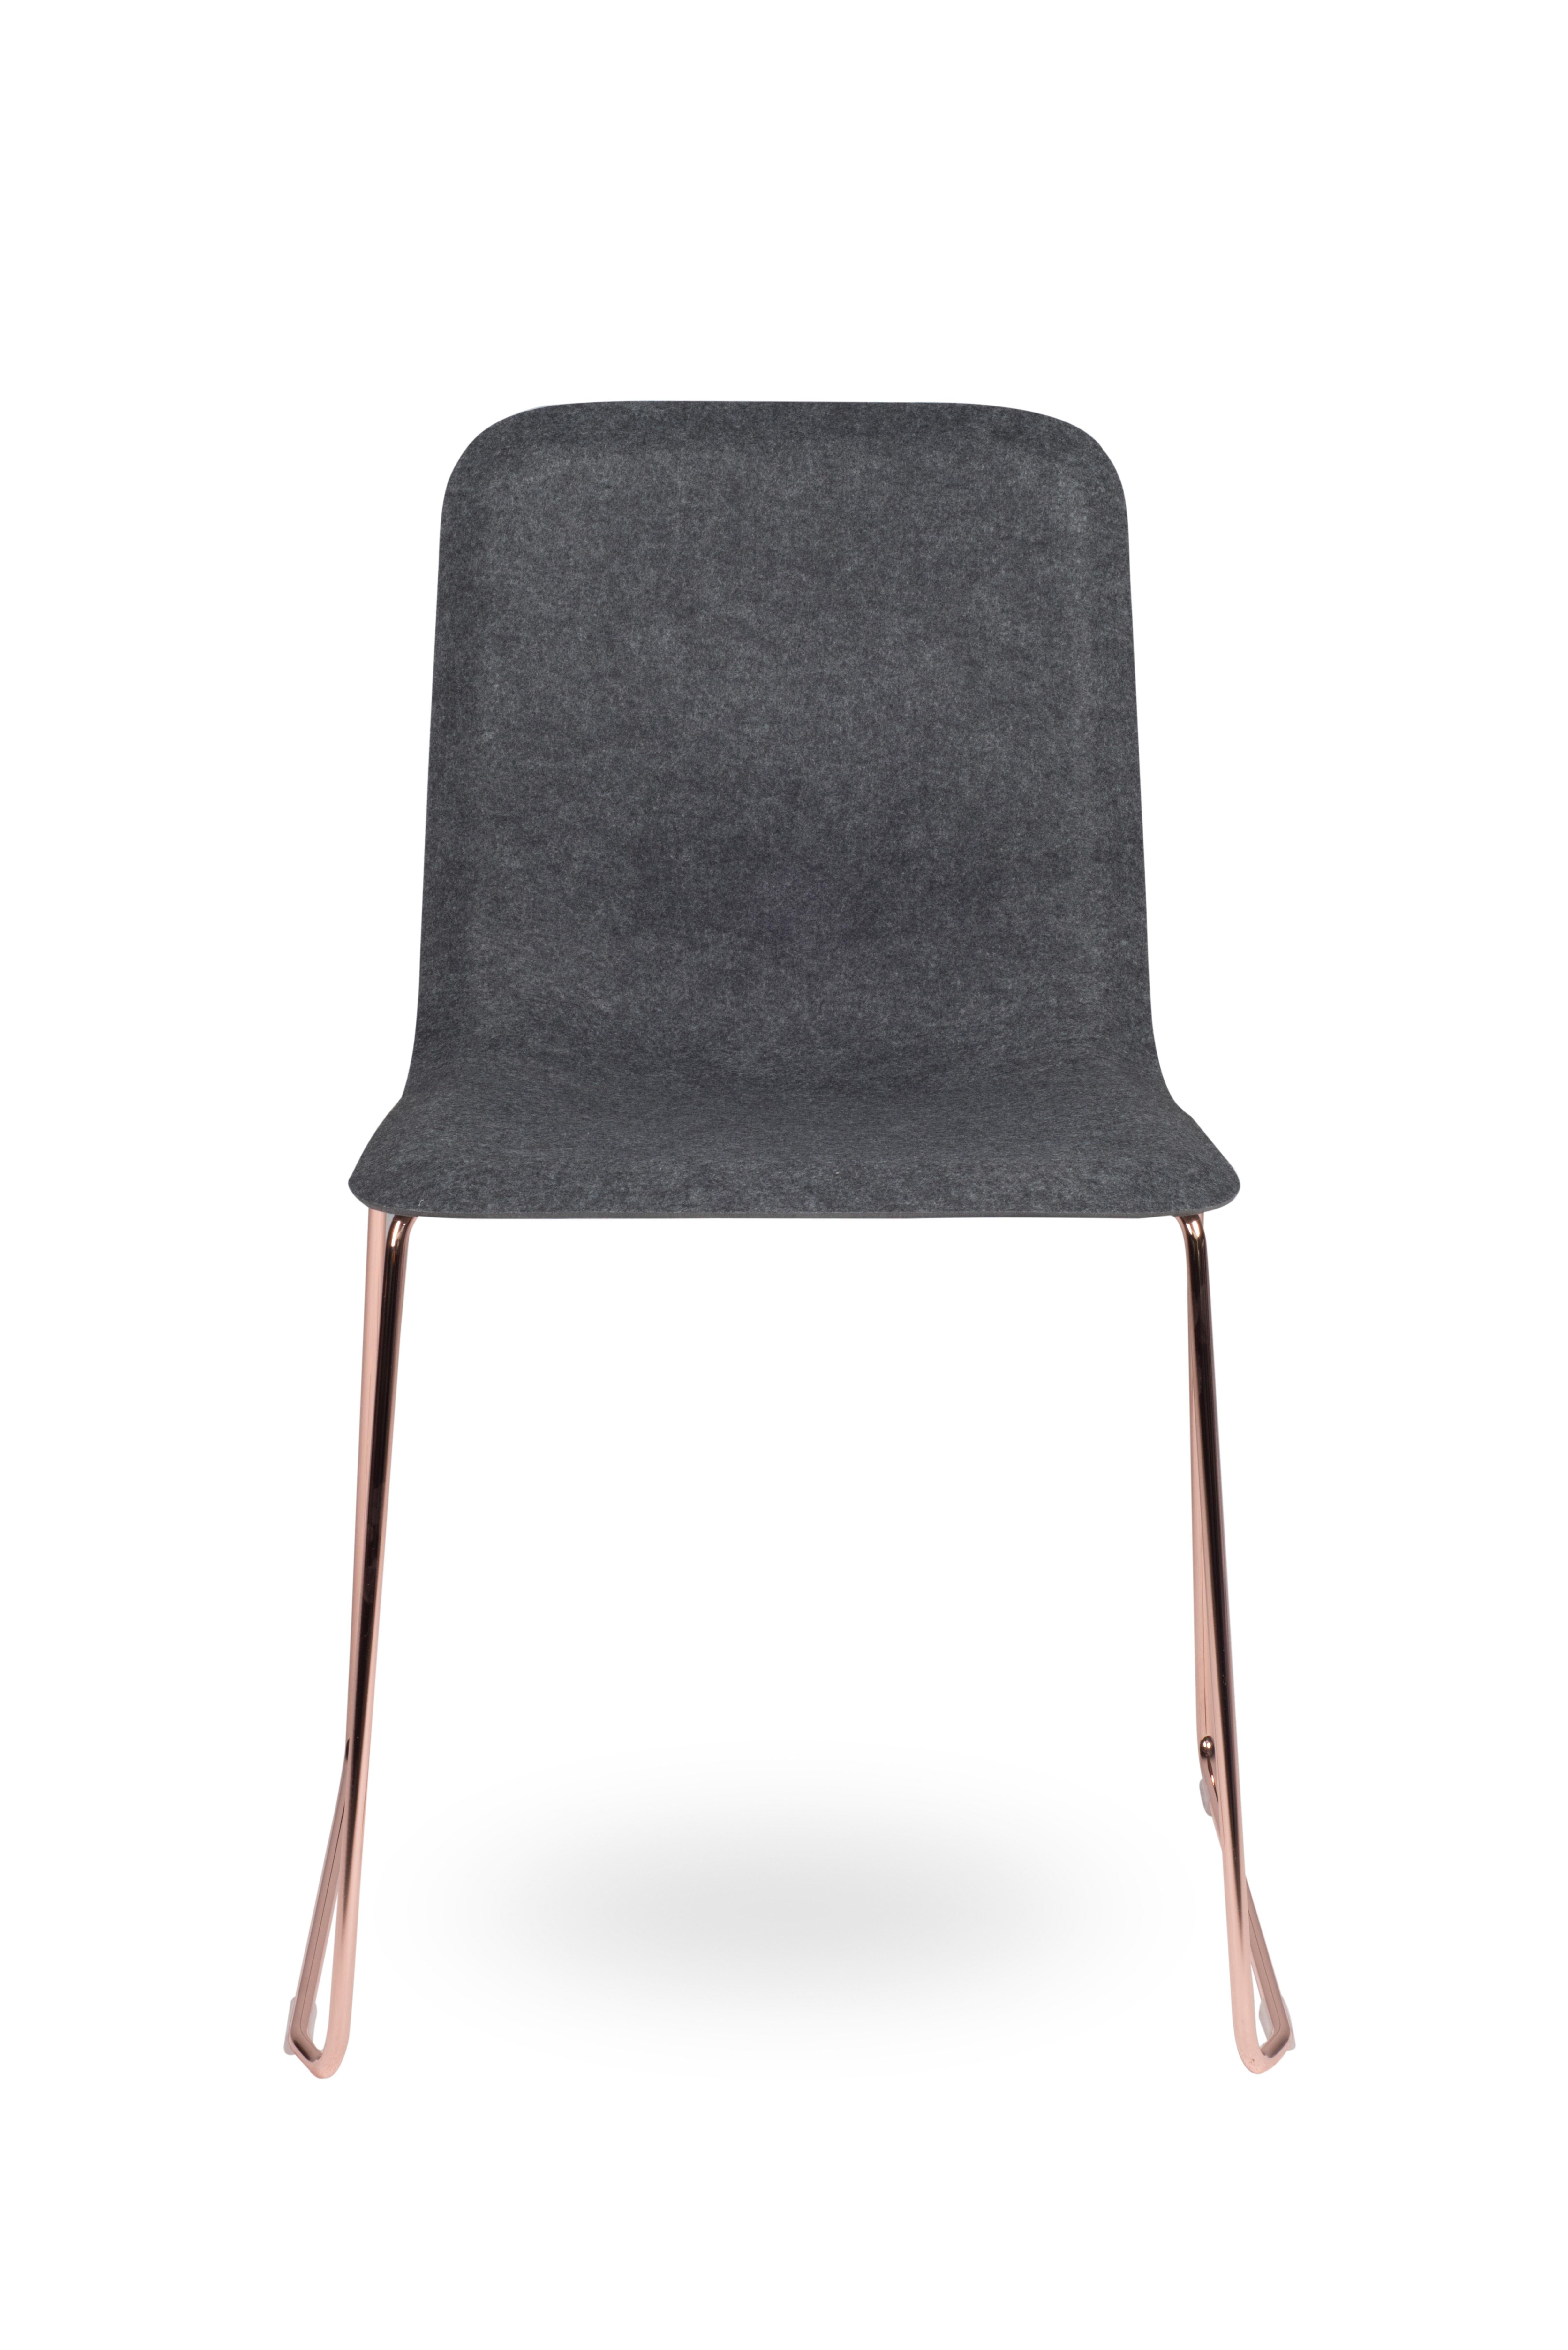 This chair

The This chair has a 5 mm thick seat and a thin chrome metal wire base. It only weighs 1.7 kg because of the minimalistic use of material. Furthermore, This chair is quick and easy to connect and can be stacked in large quantities. The